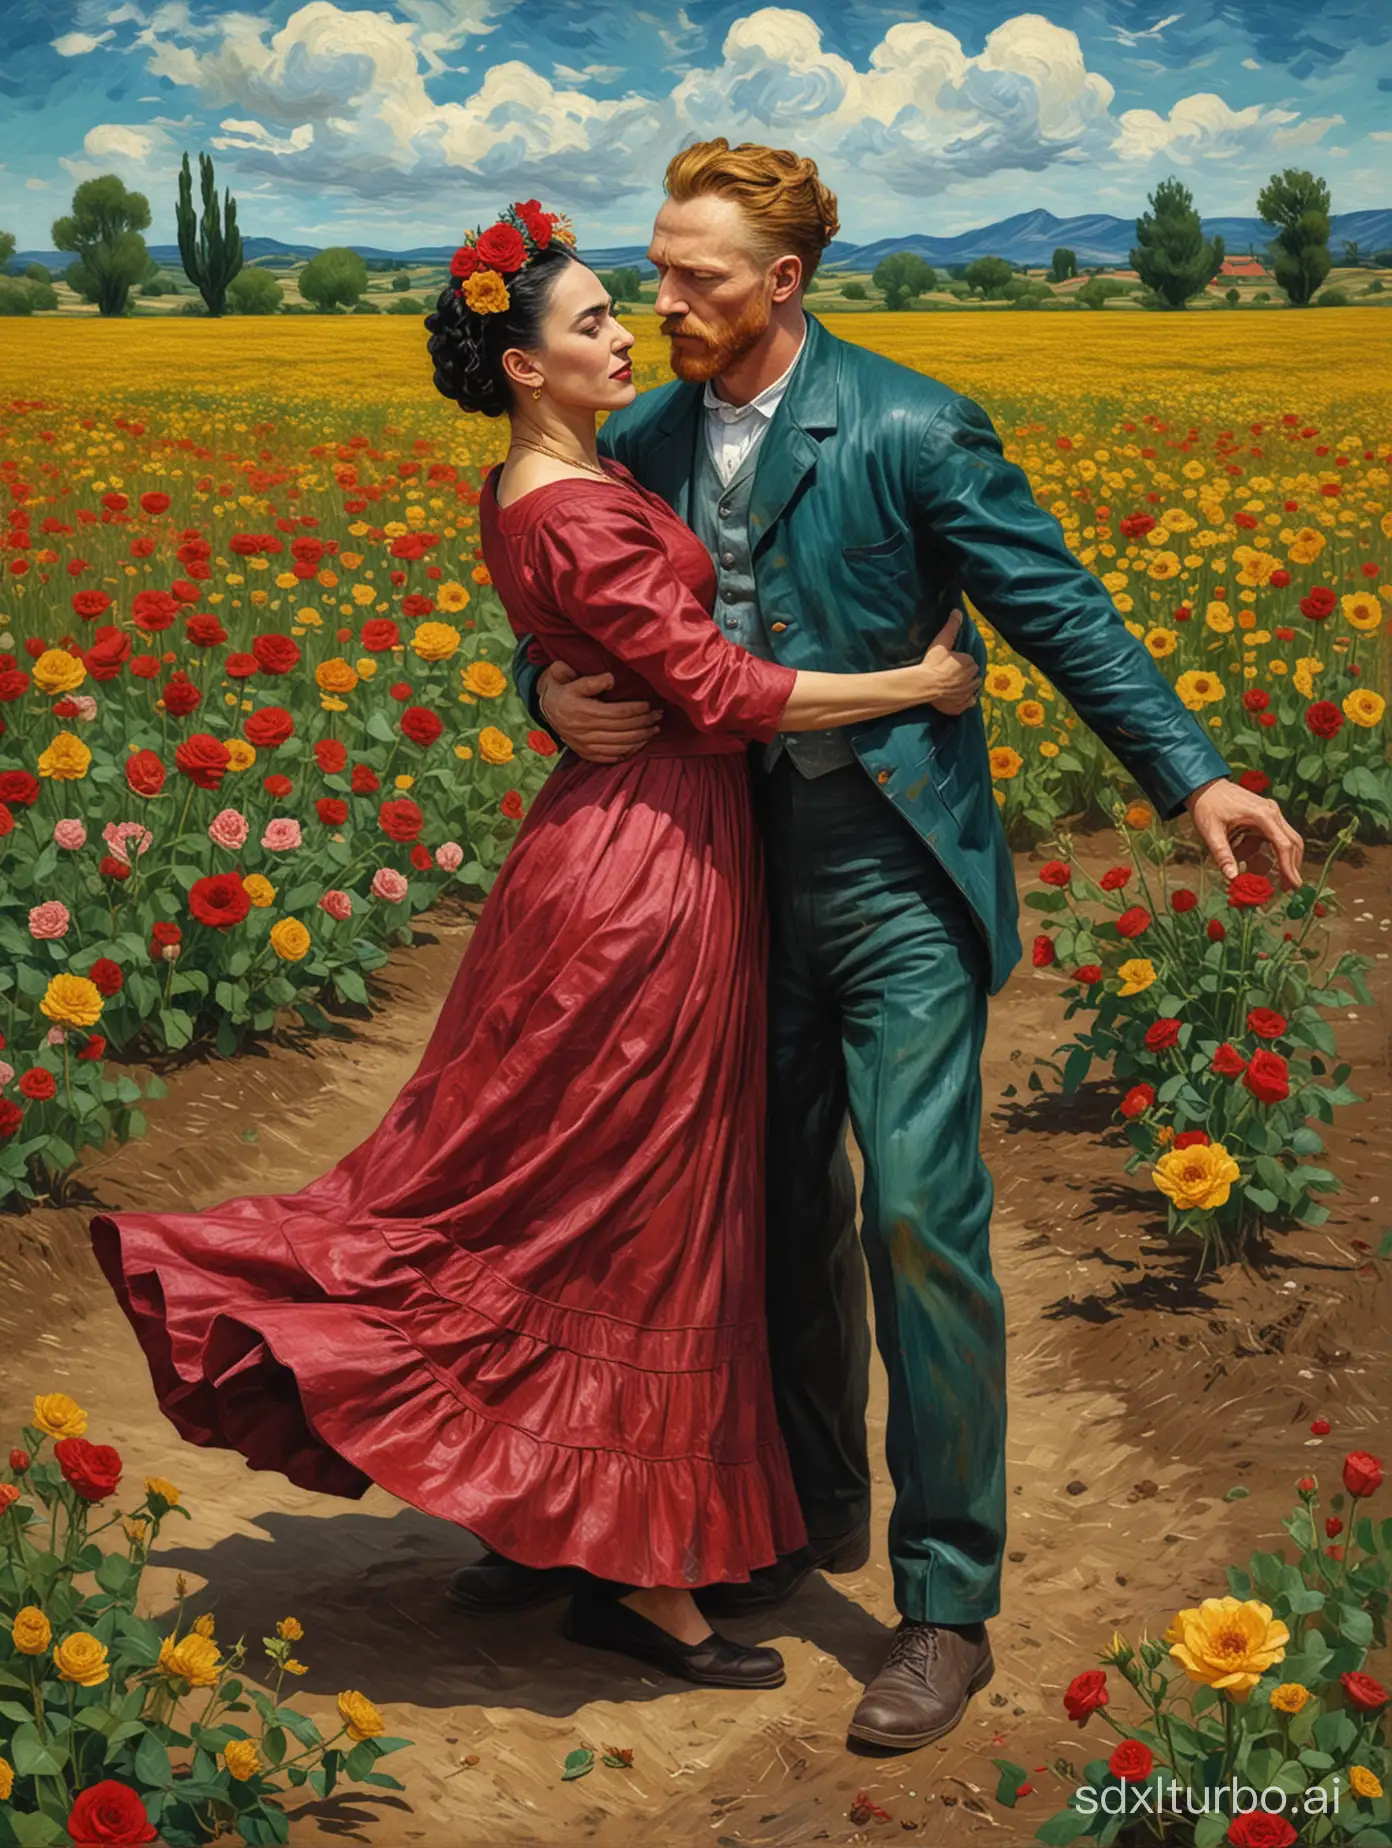 "van gogh and frida kahlo dancing on the corpse of a rose in the field"

van gogh style